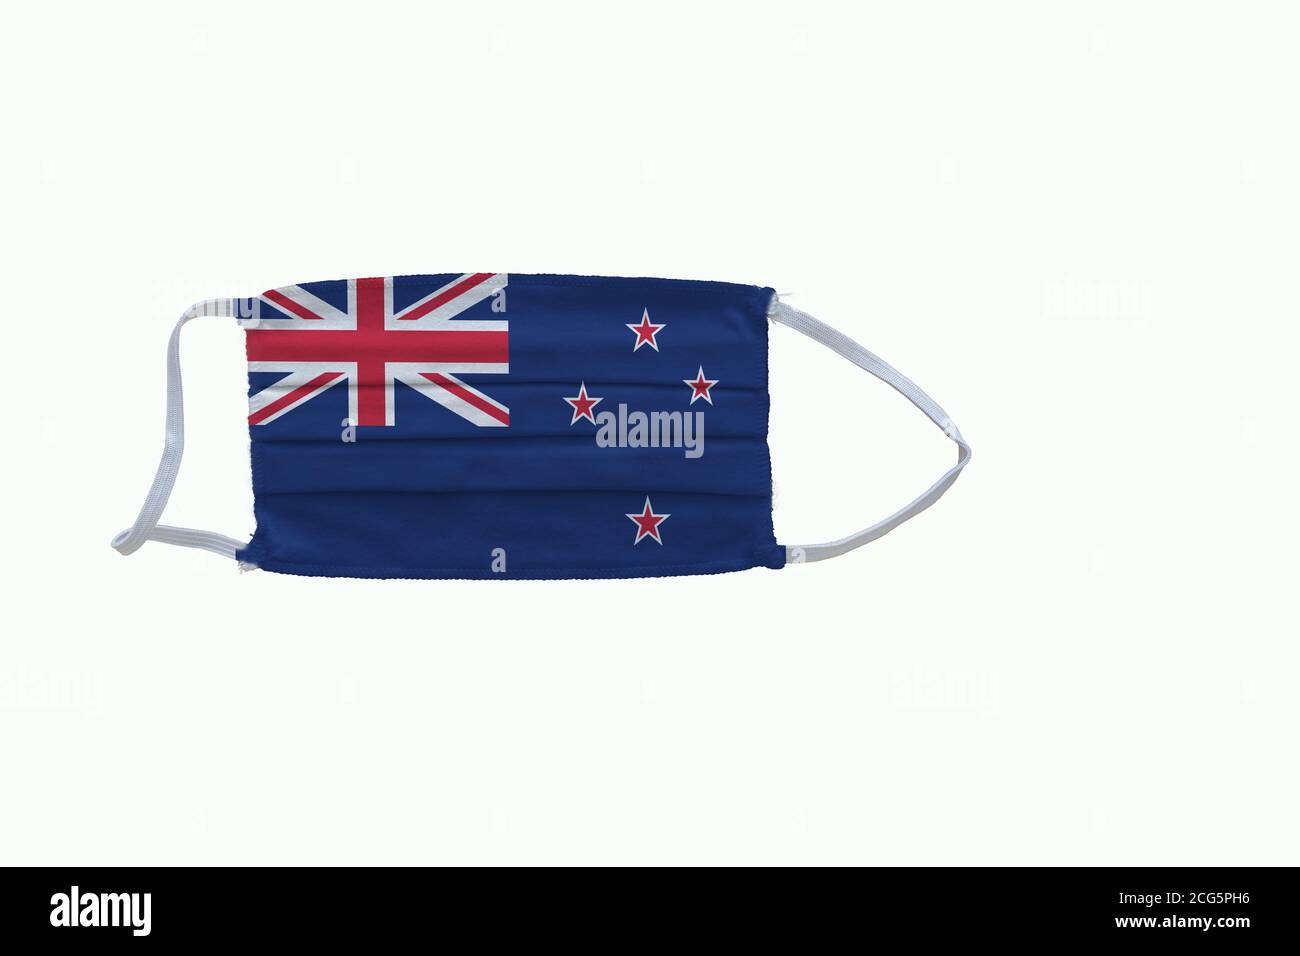 New Zealand  flag design Covid-19 pandemic  virus face mask  on a white background with copy space Stock Photo